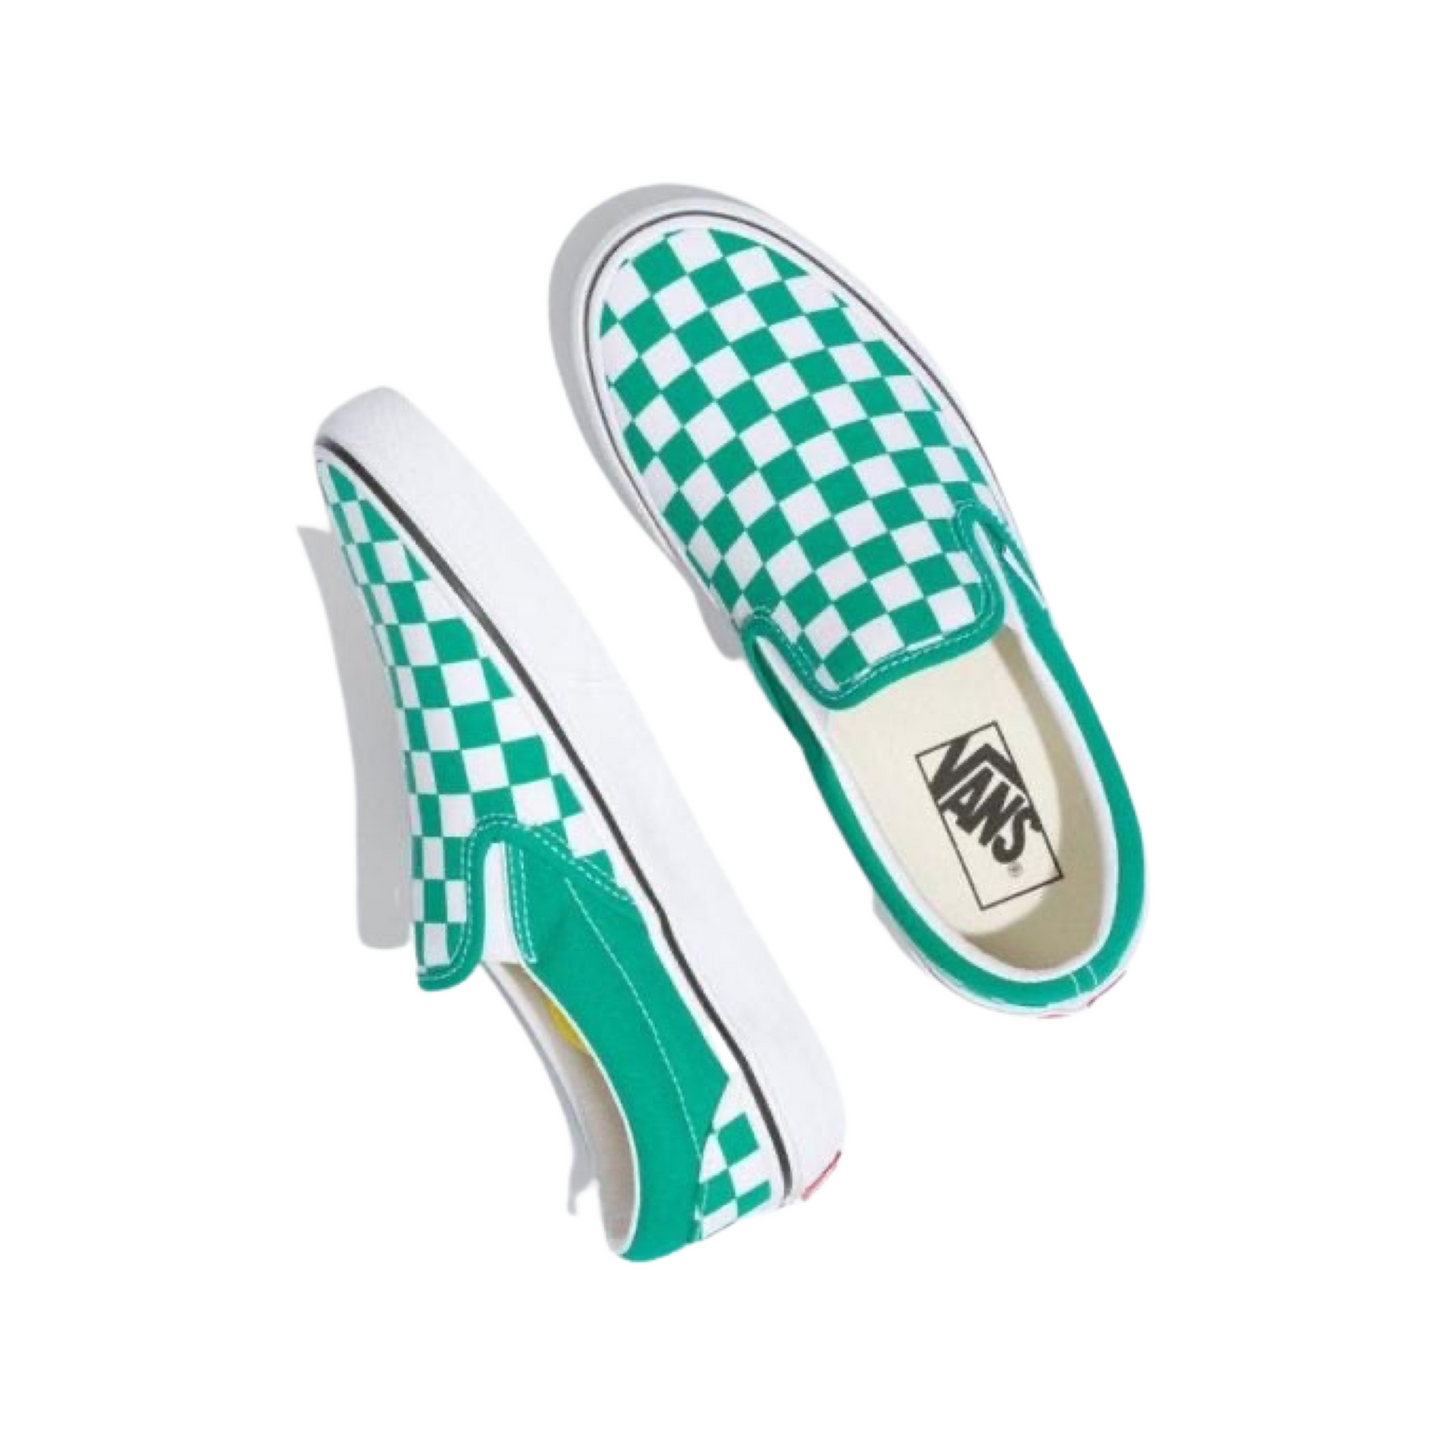 Classic Slip On Checkerboard Pepper Green True White by Vans